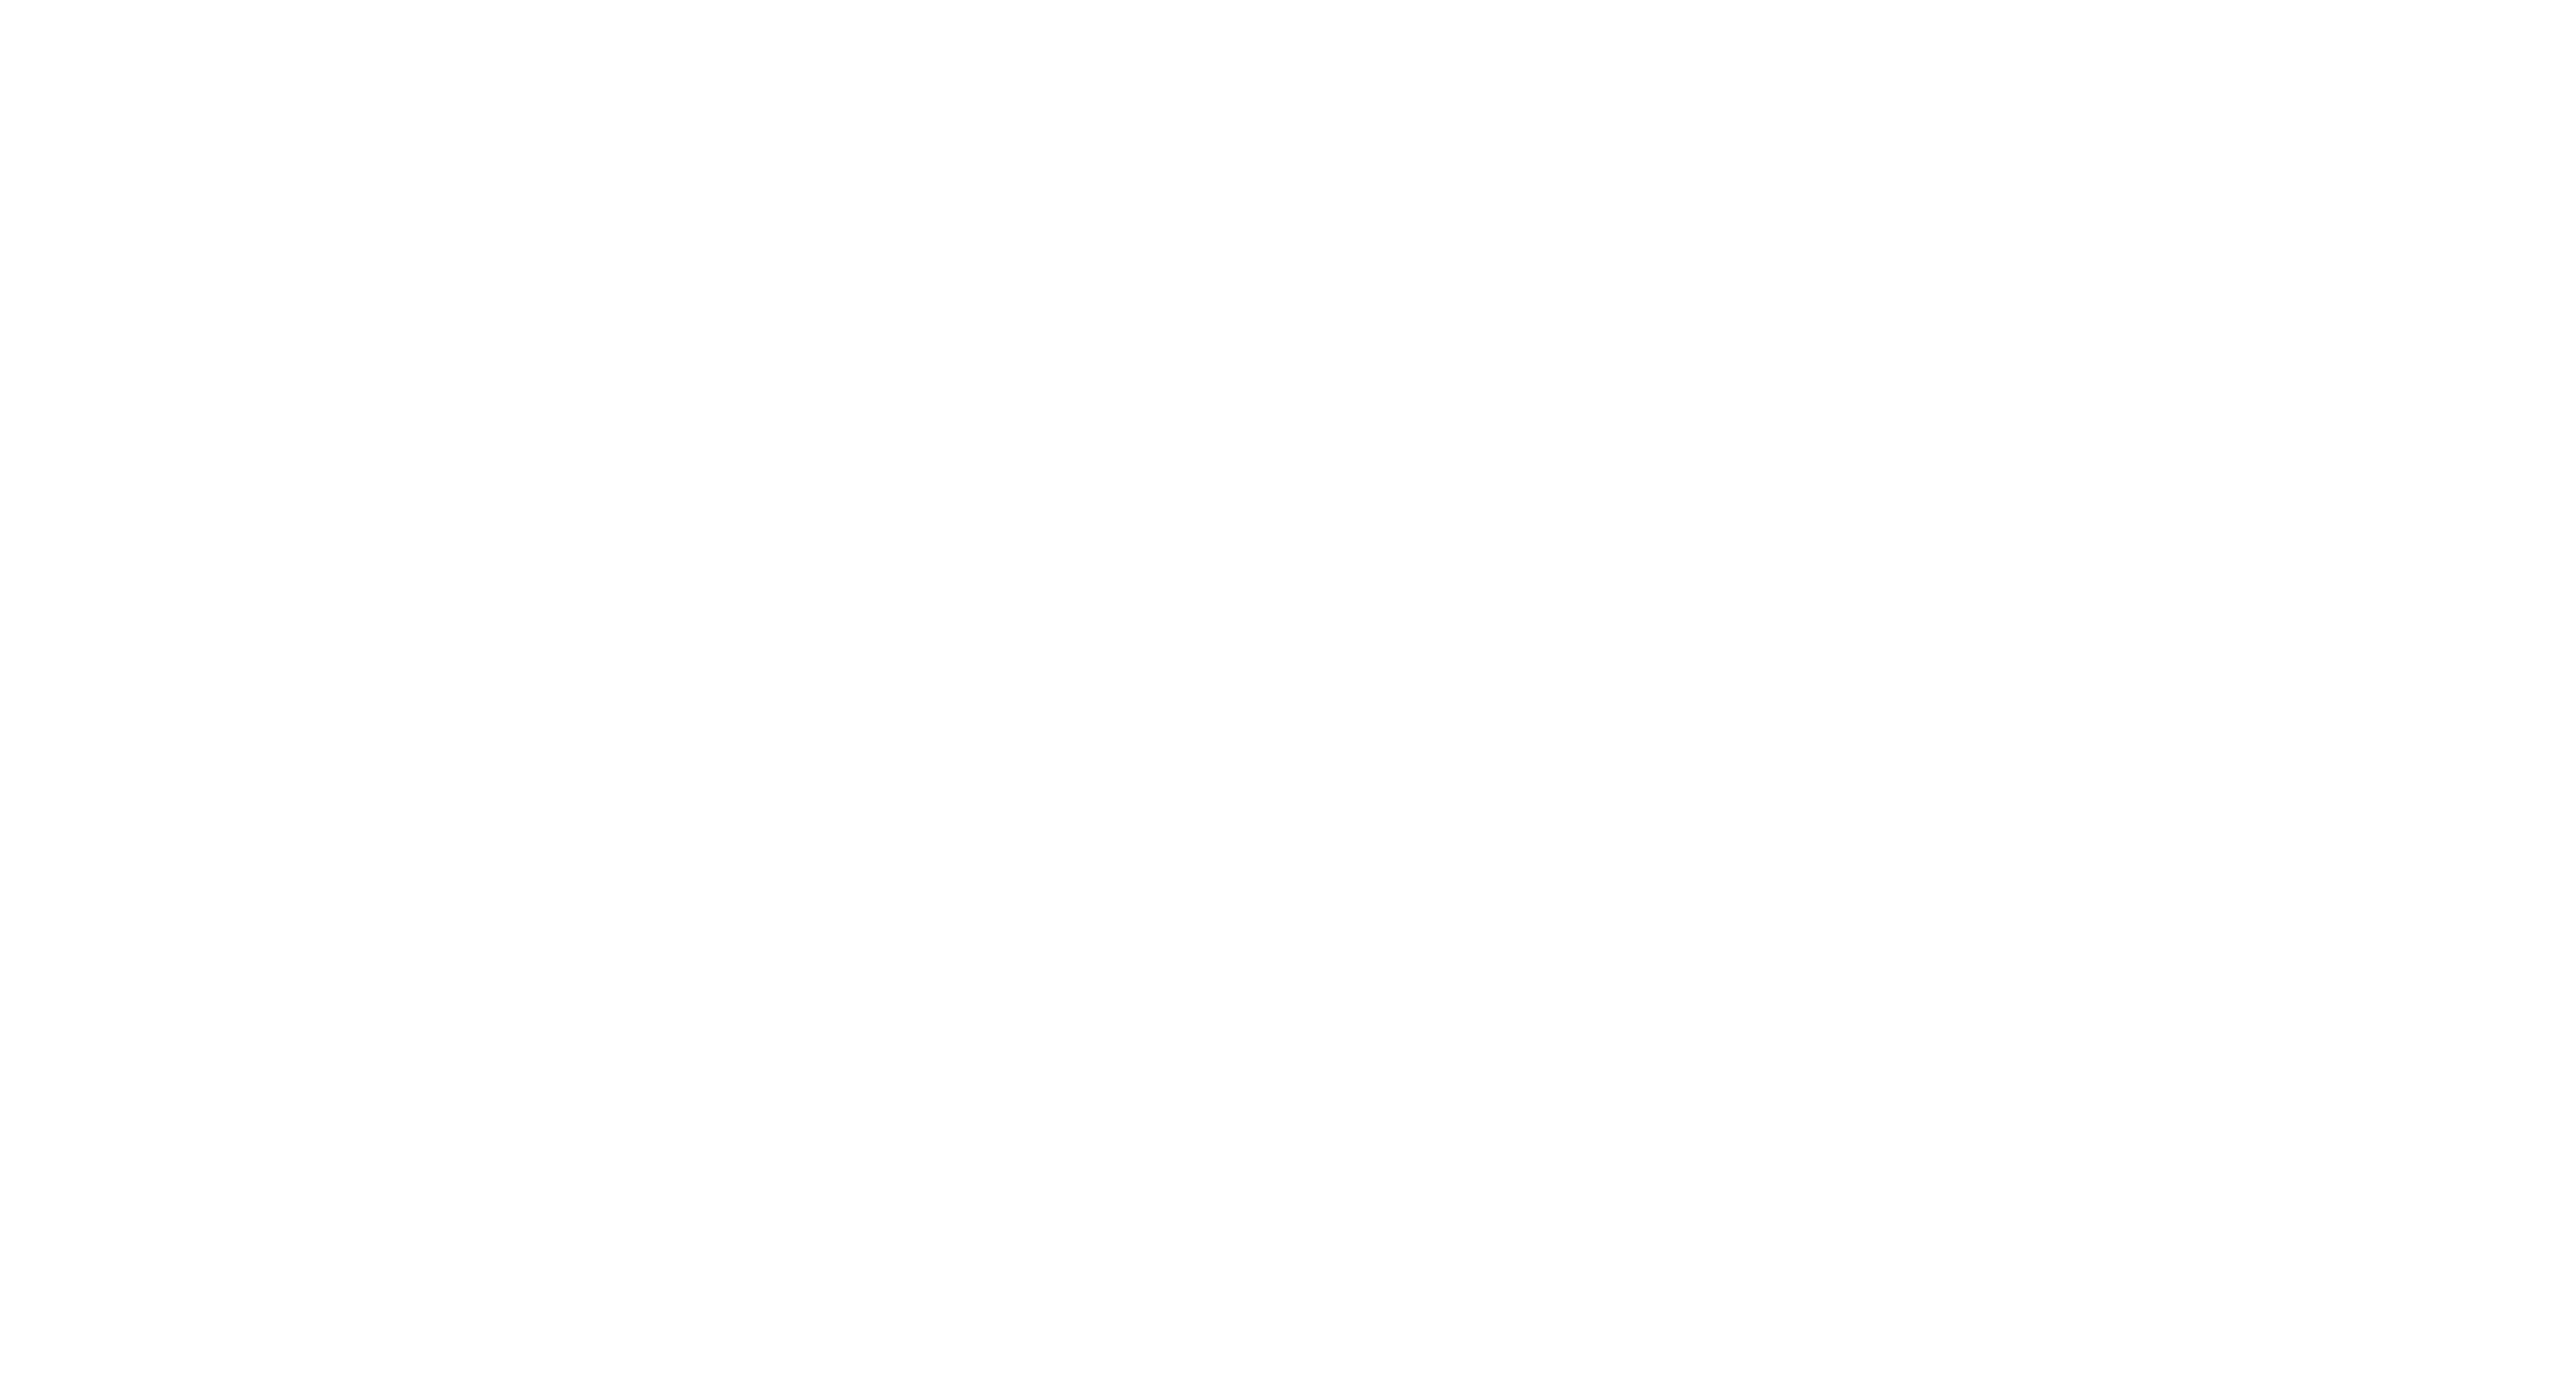 Poxell Company Global